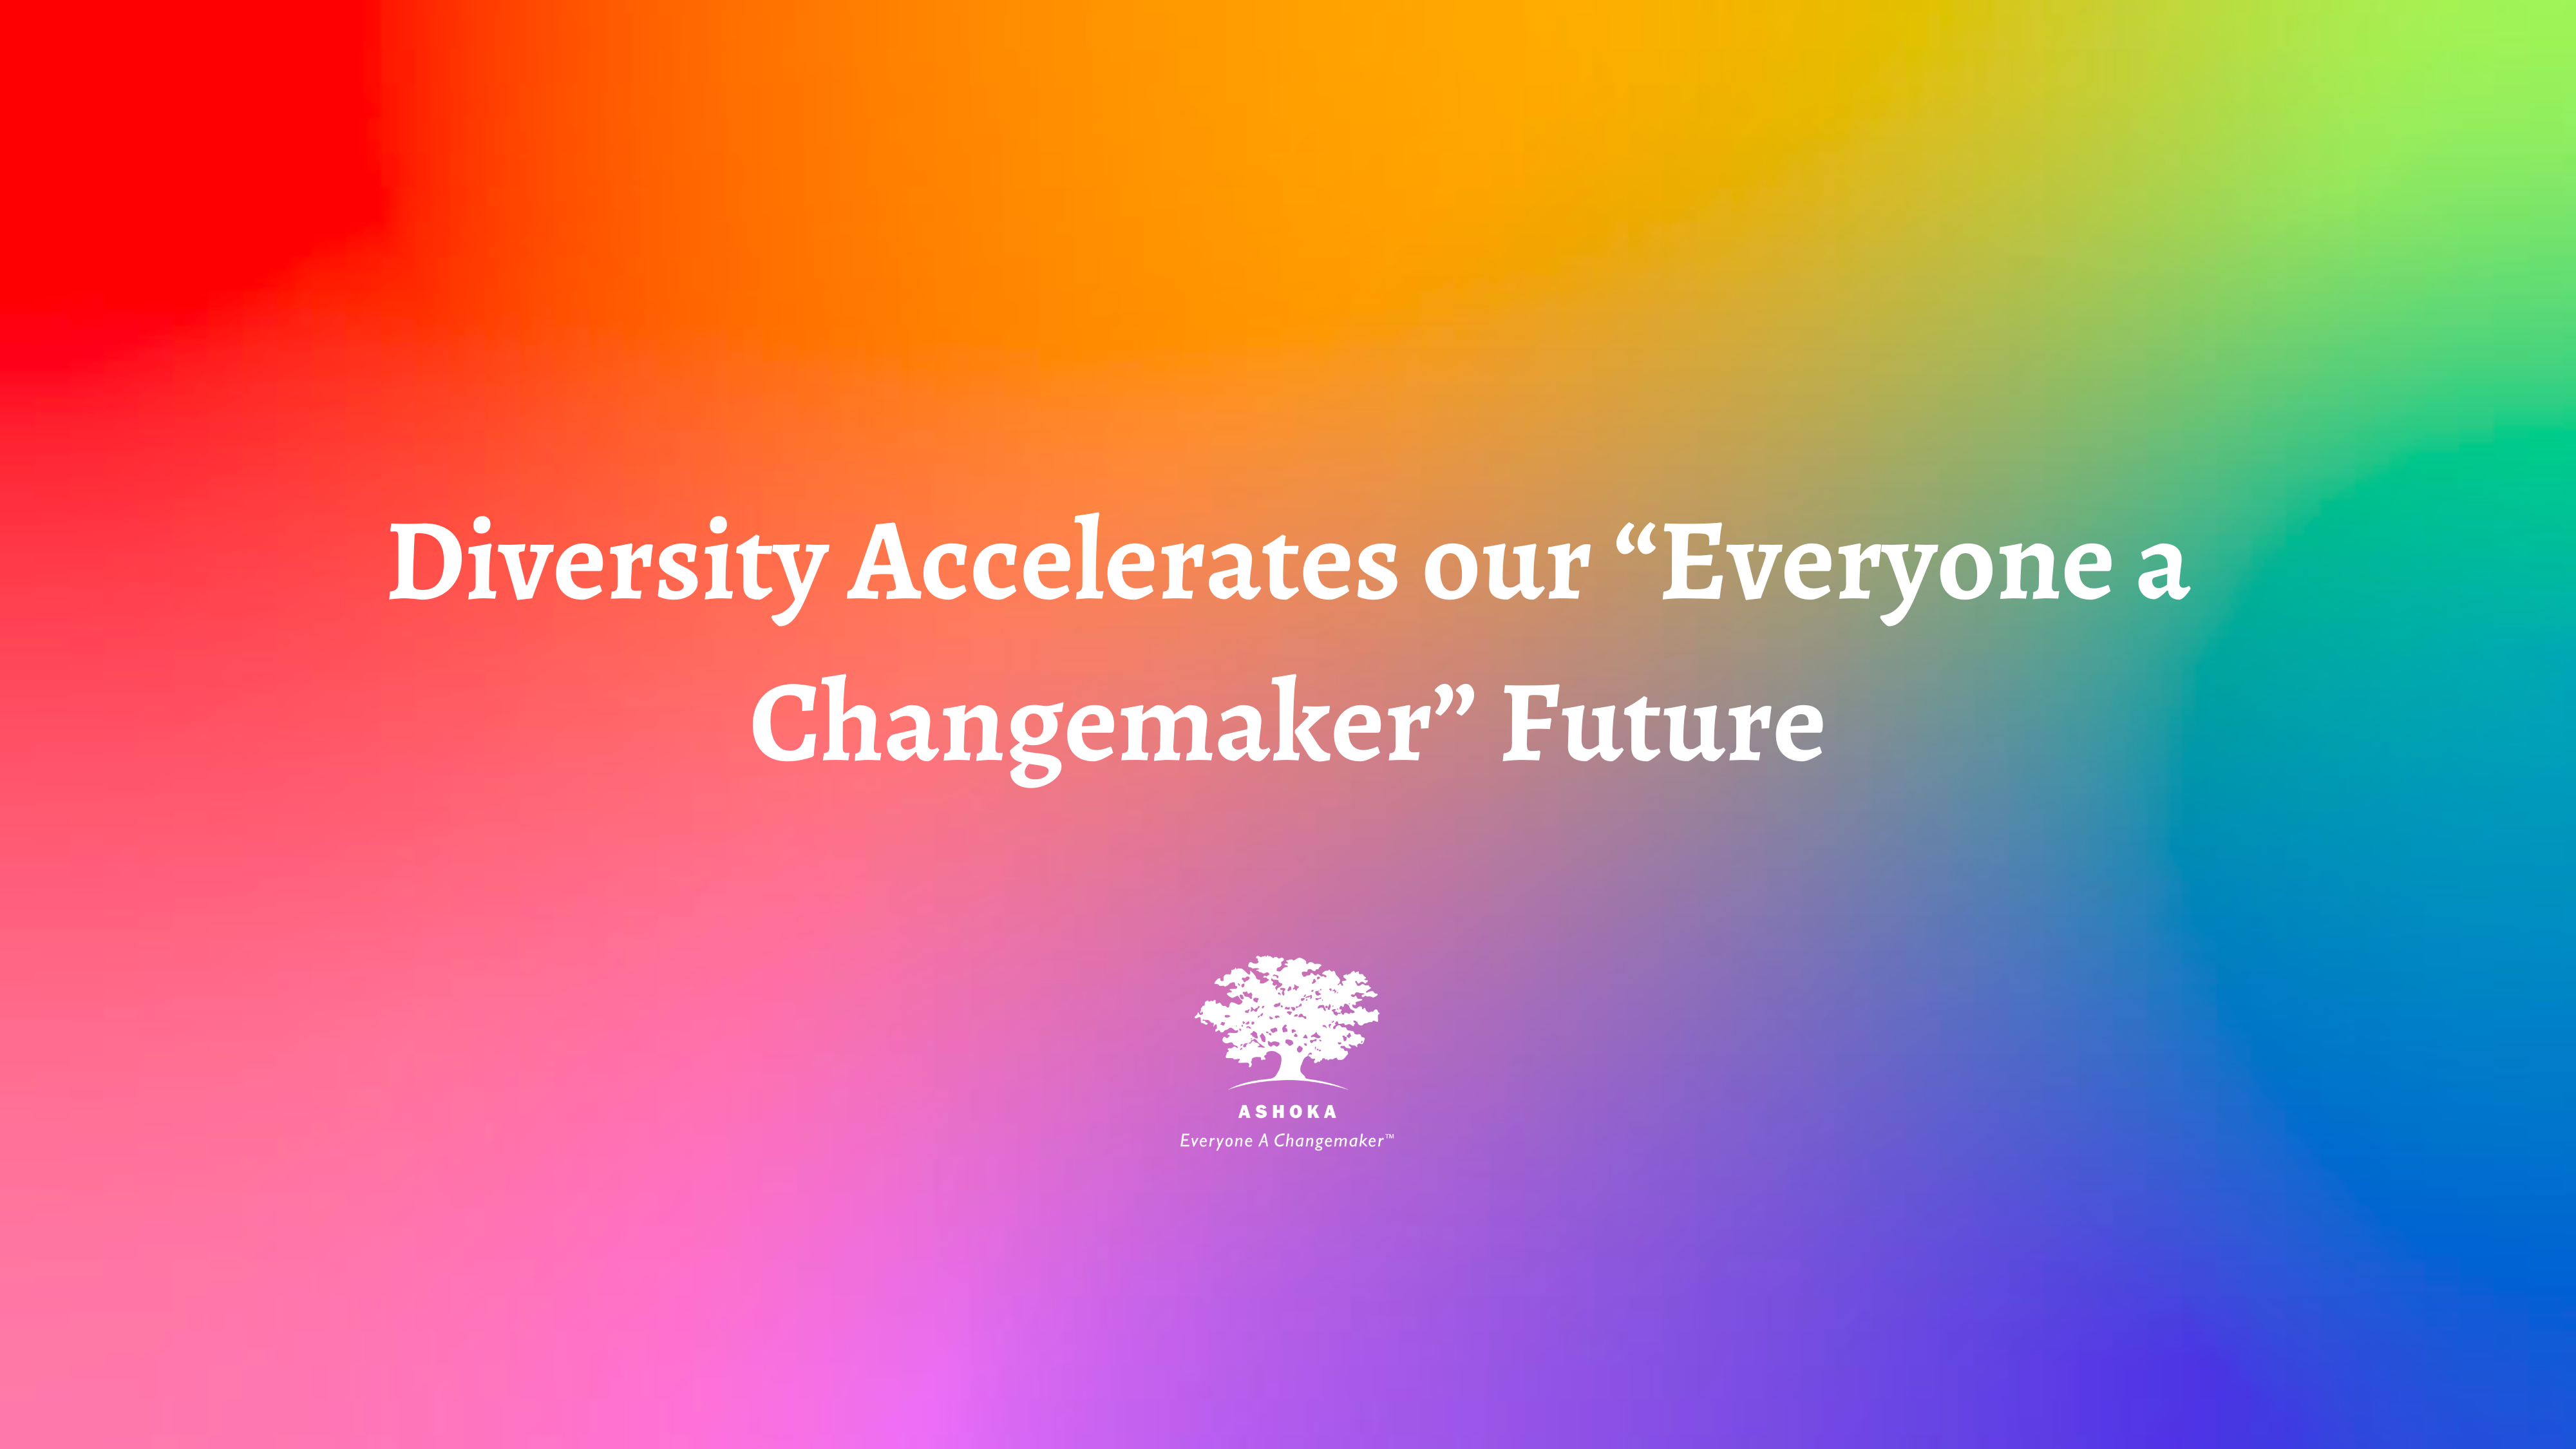 Diversity Accelerates our “Everyone a Changemaker” Future